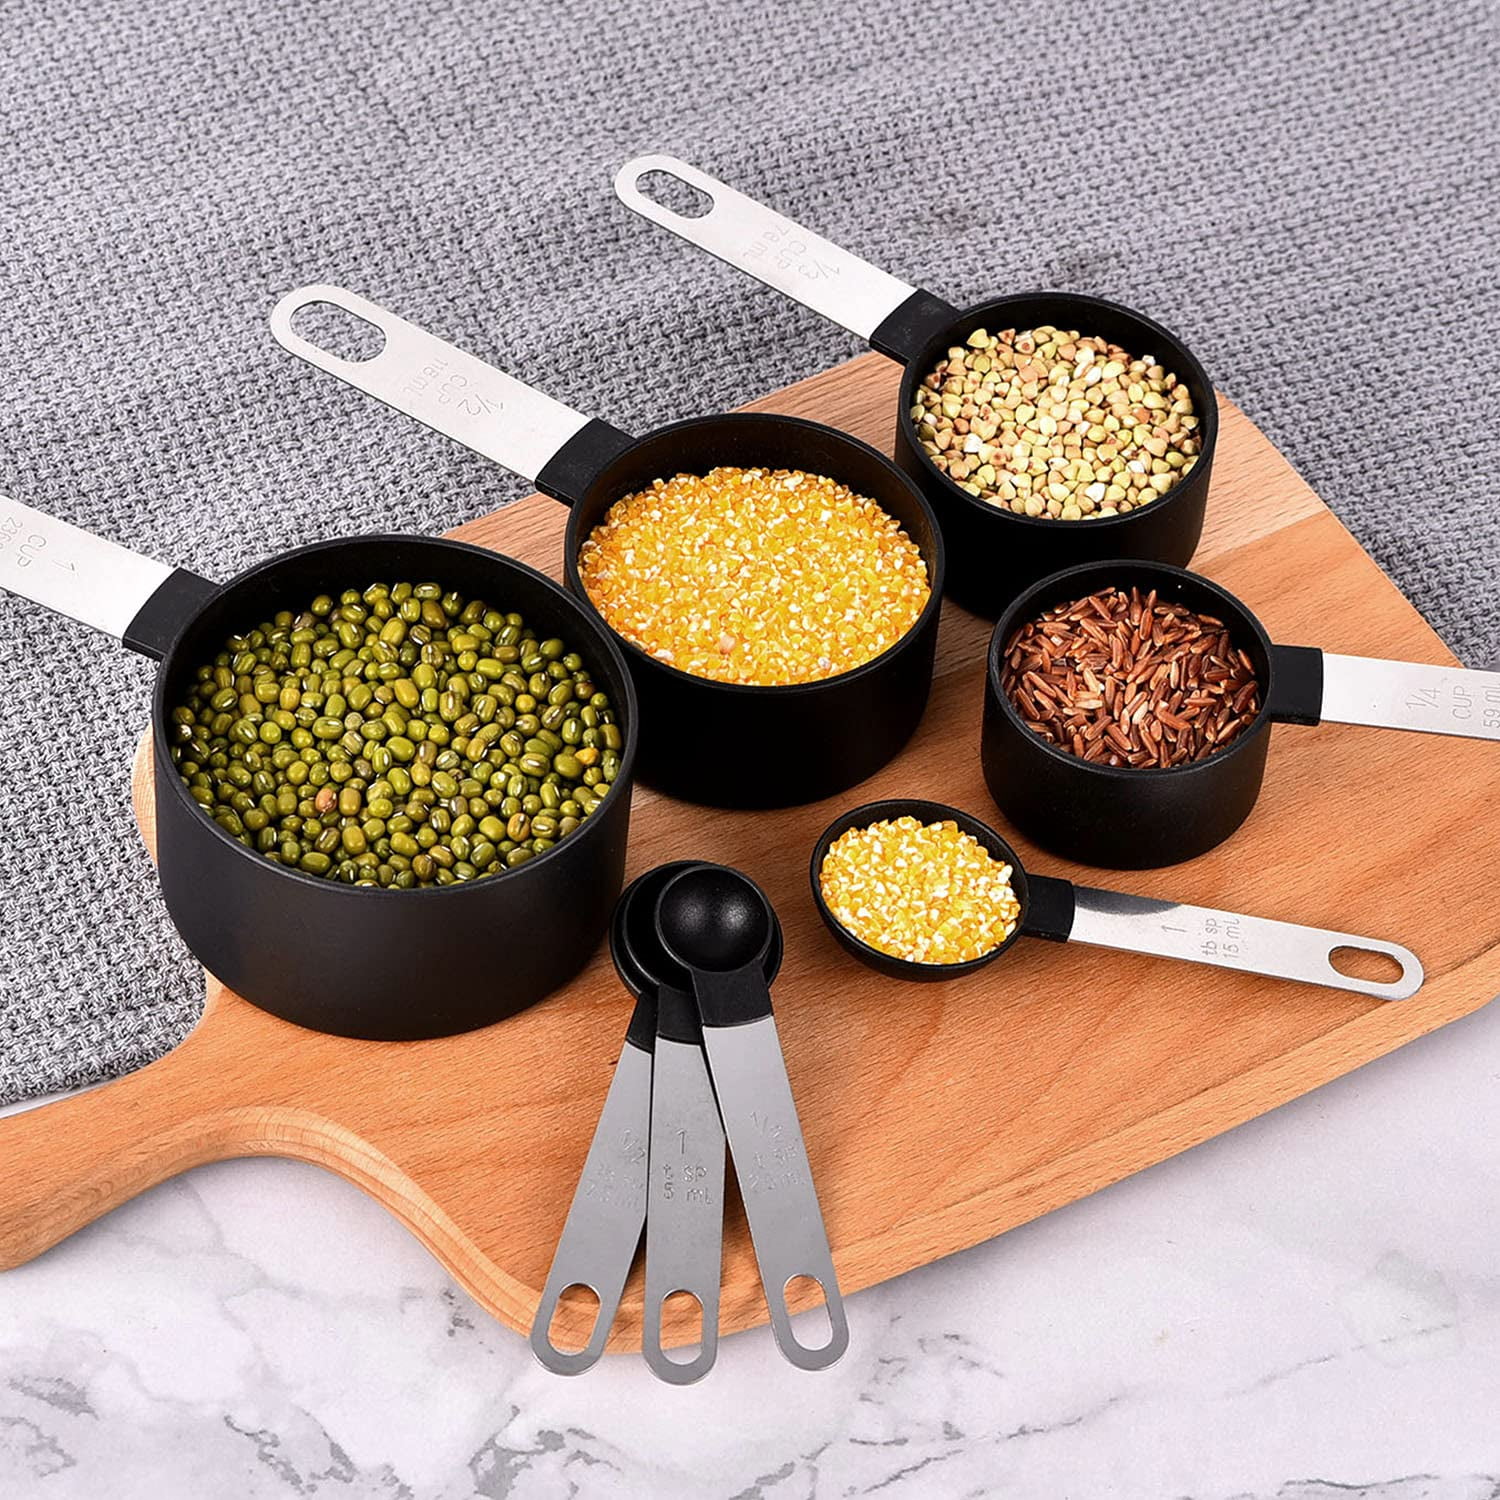 Magnetic Measuring Cups - 4 Piece Set Includes ¼ Cup, ⅓ Cup, ½ Cup and 1 Cup